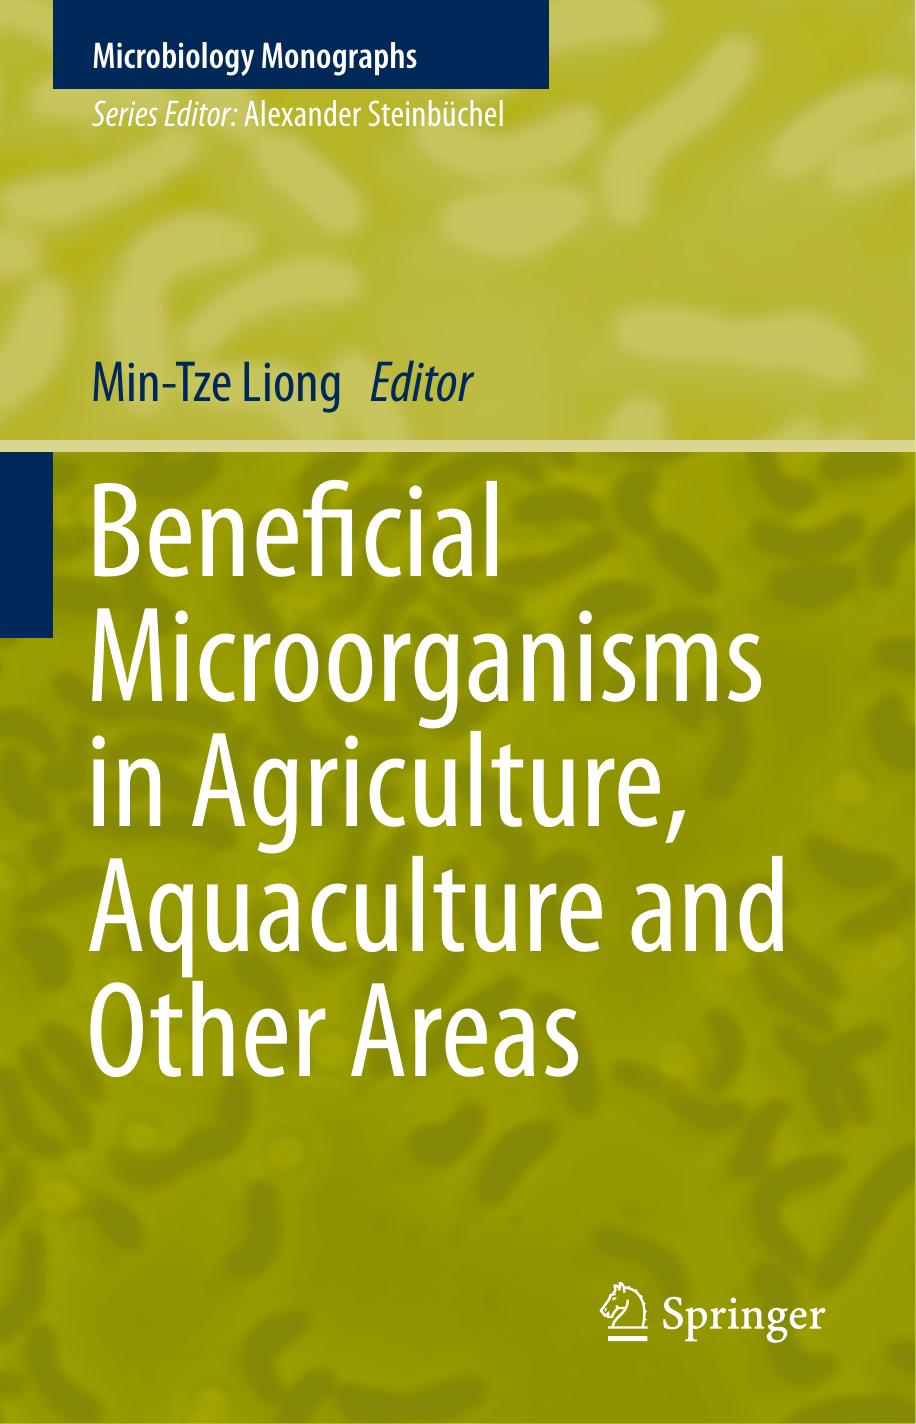 Beneficial Microorganisms in Agriculture, Aquaculture and Other Areas 2015